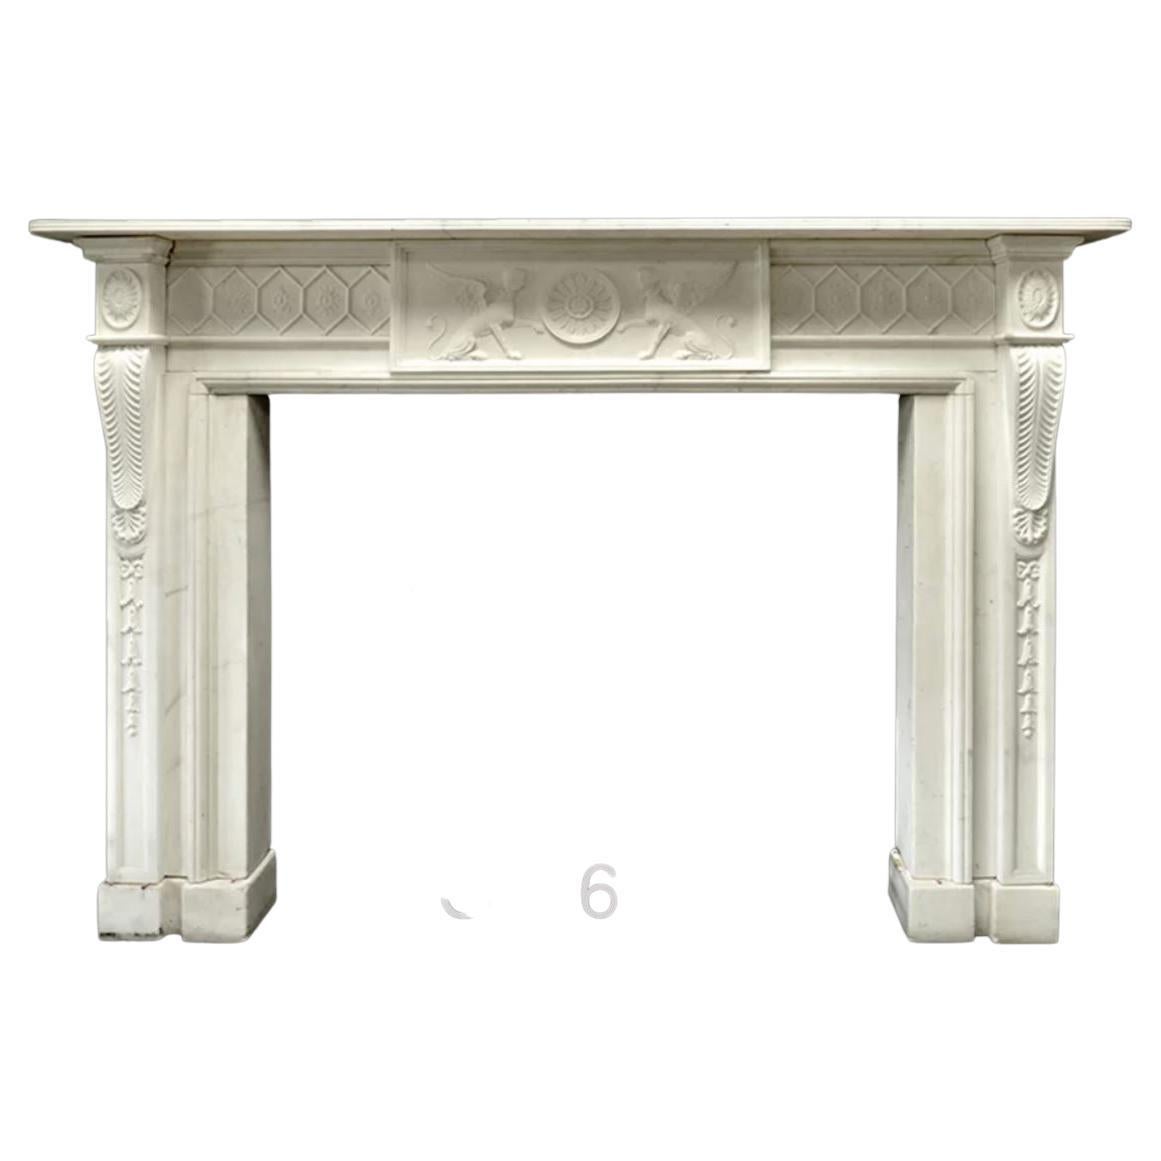 Refined Adam Period Chimneypiece Carved in White Statuary Marble